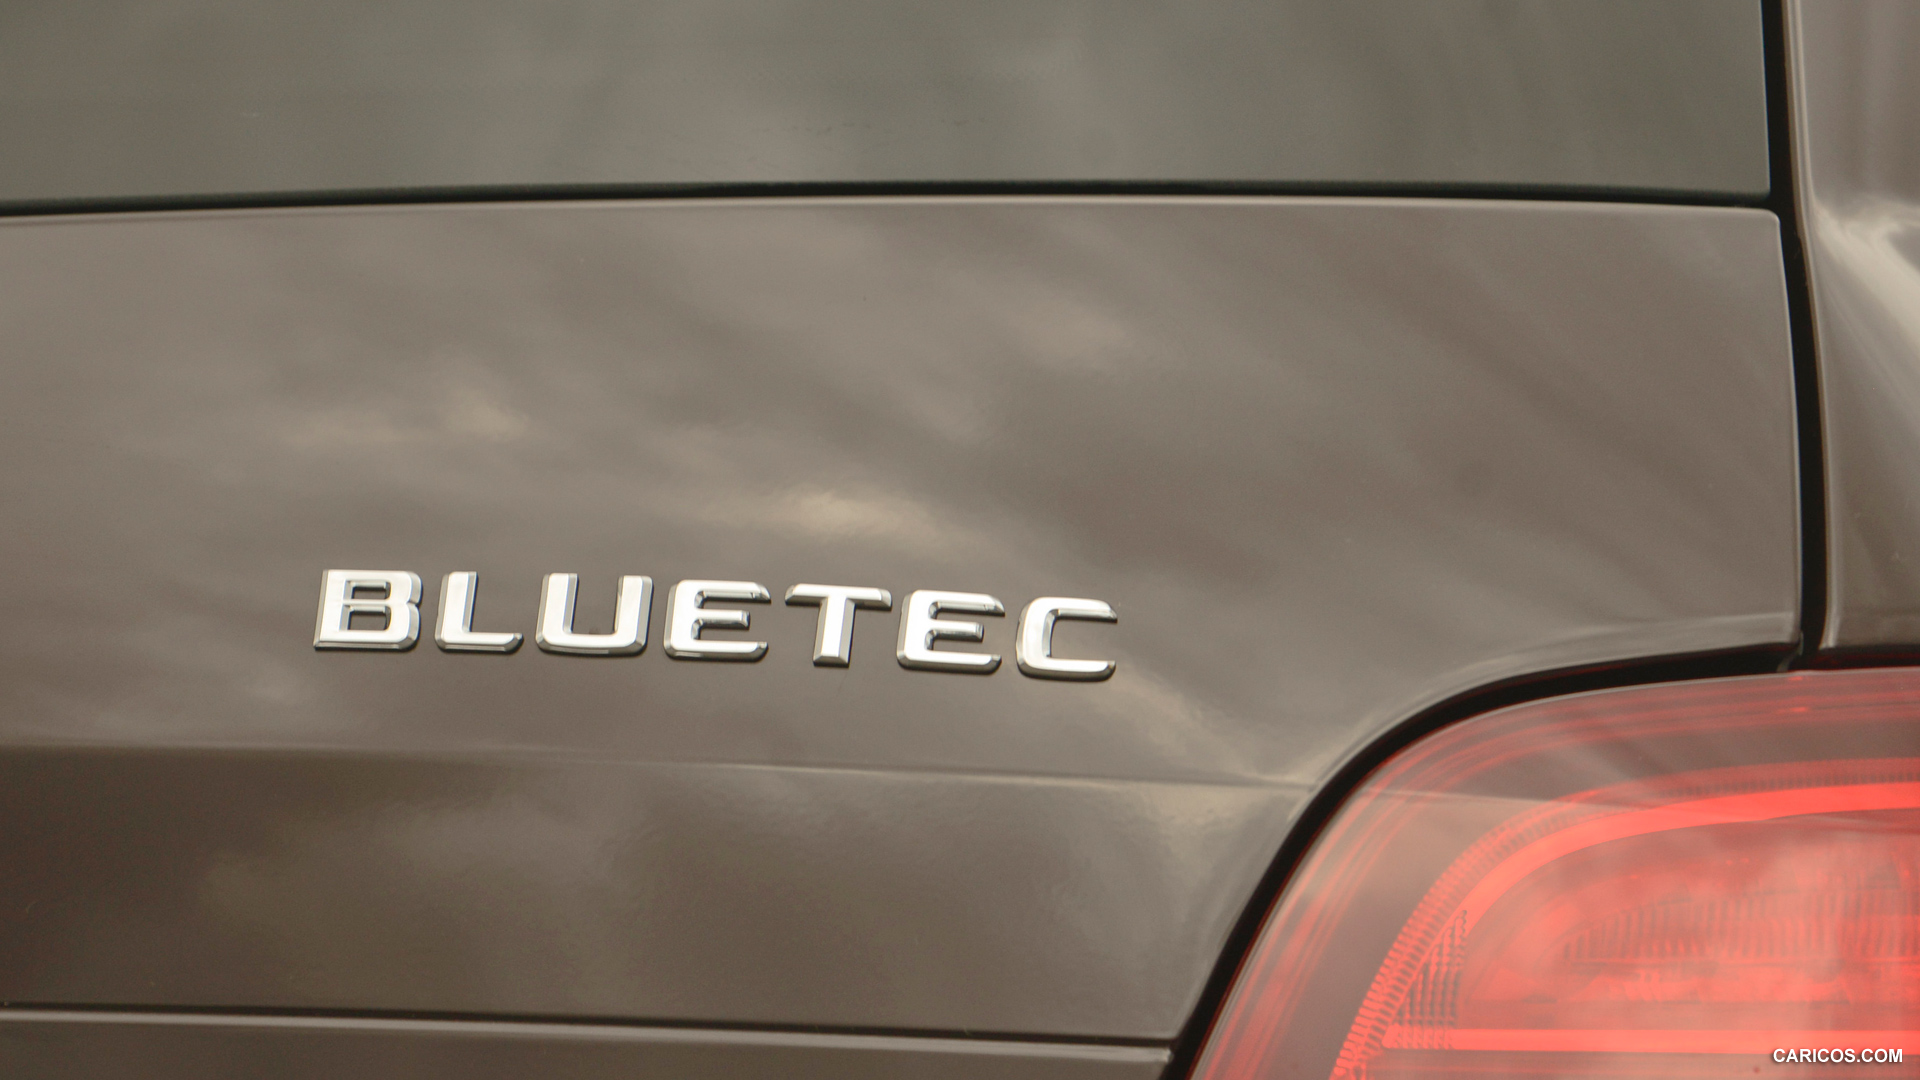 2013 Mercedes-Benz GLK250 BlueTEC (Fully Equipped) - Badge, #75 of 109